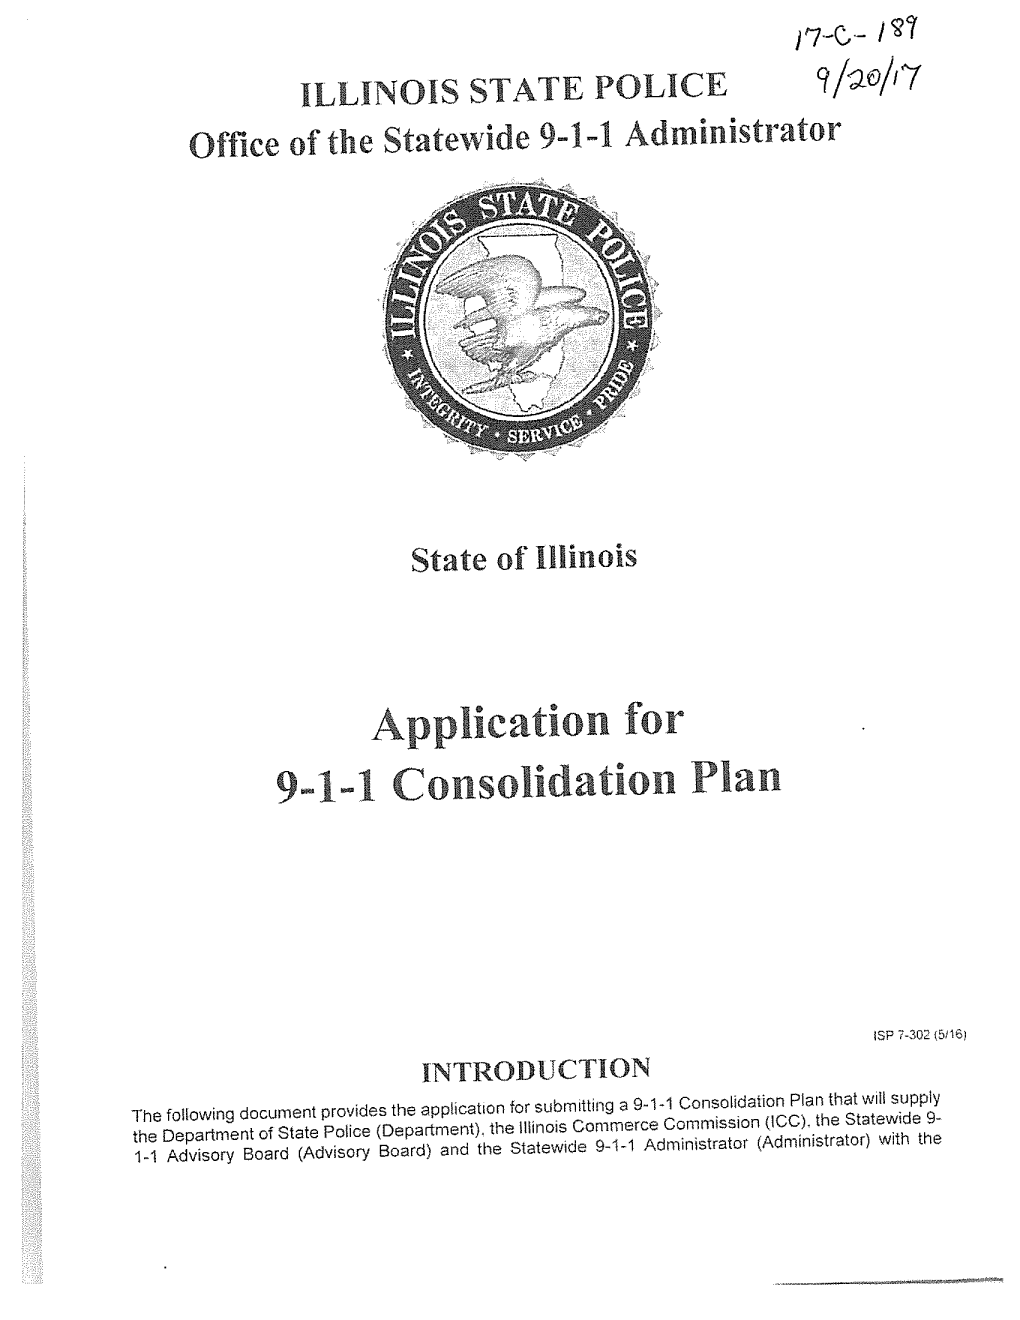 Application for 9-1-1 Consolidation Plan